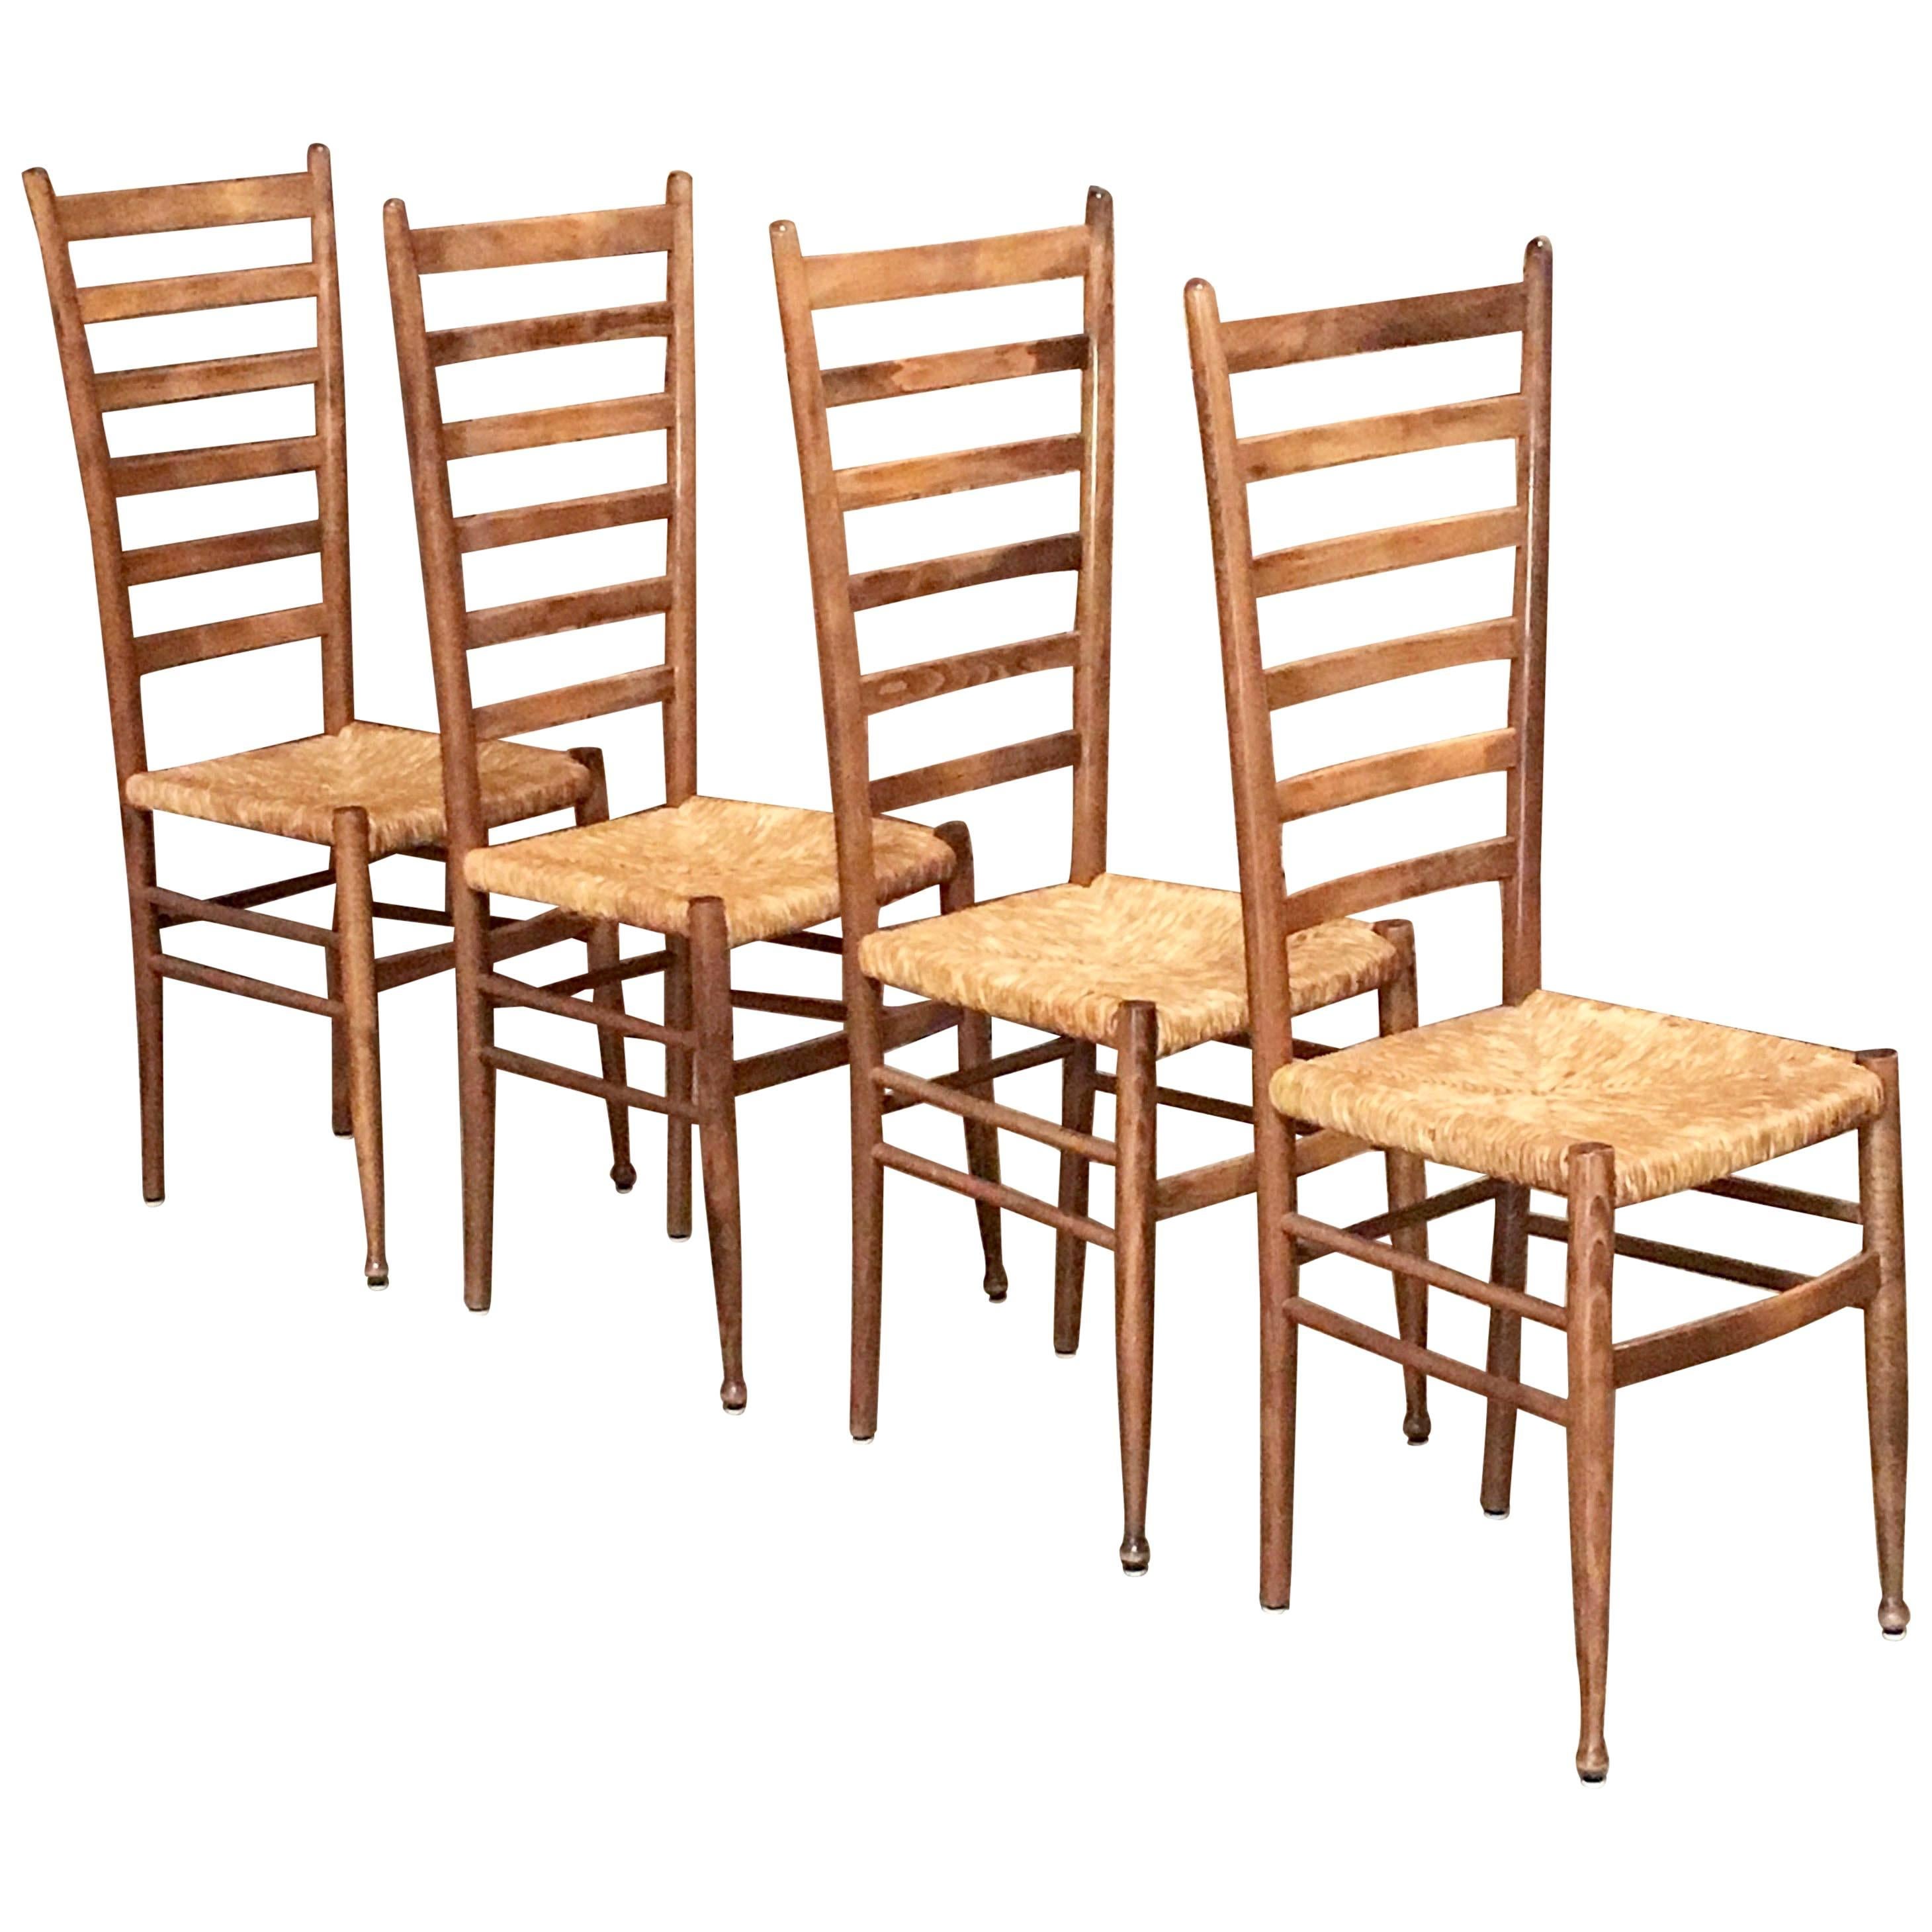 Set of Four Italian Ladder Back Chairs in the Style of Gio Ponti